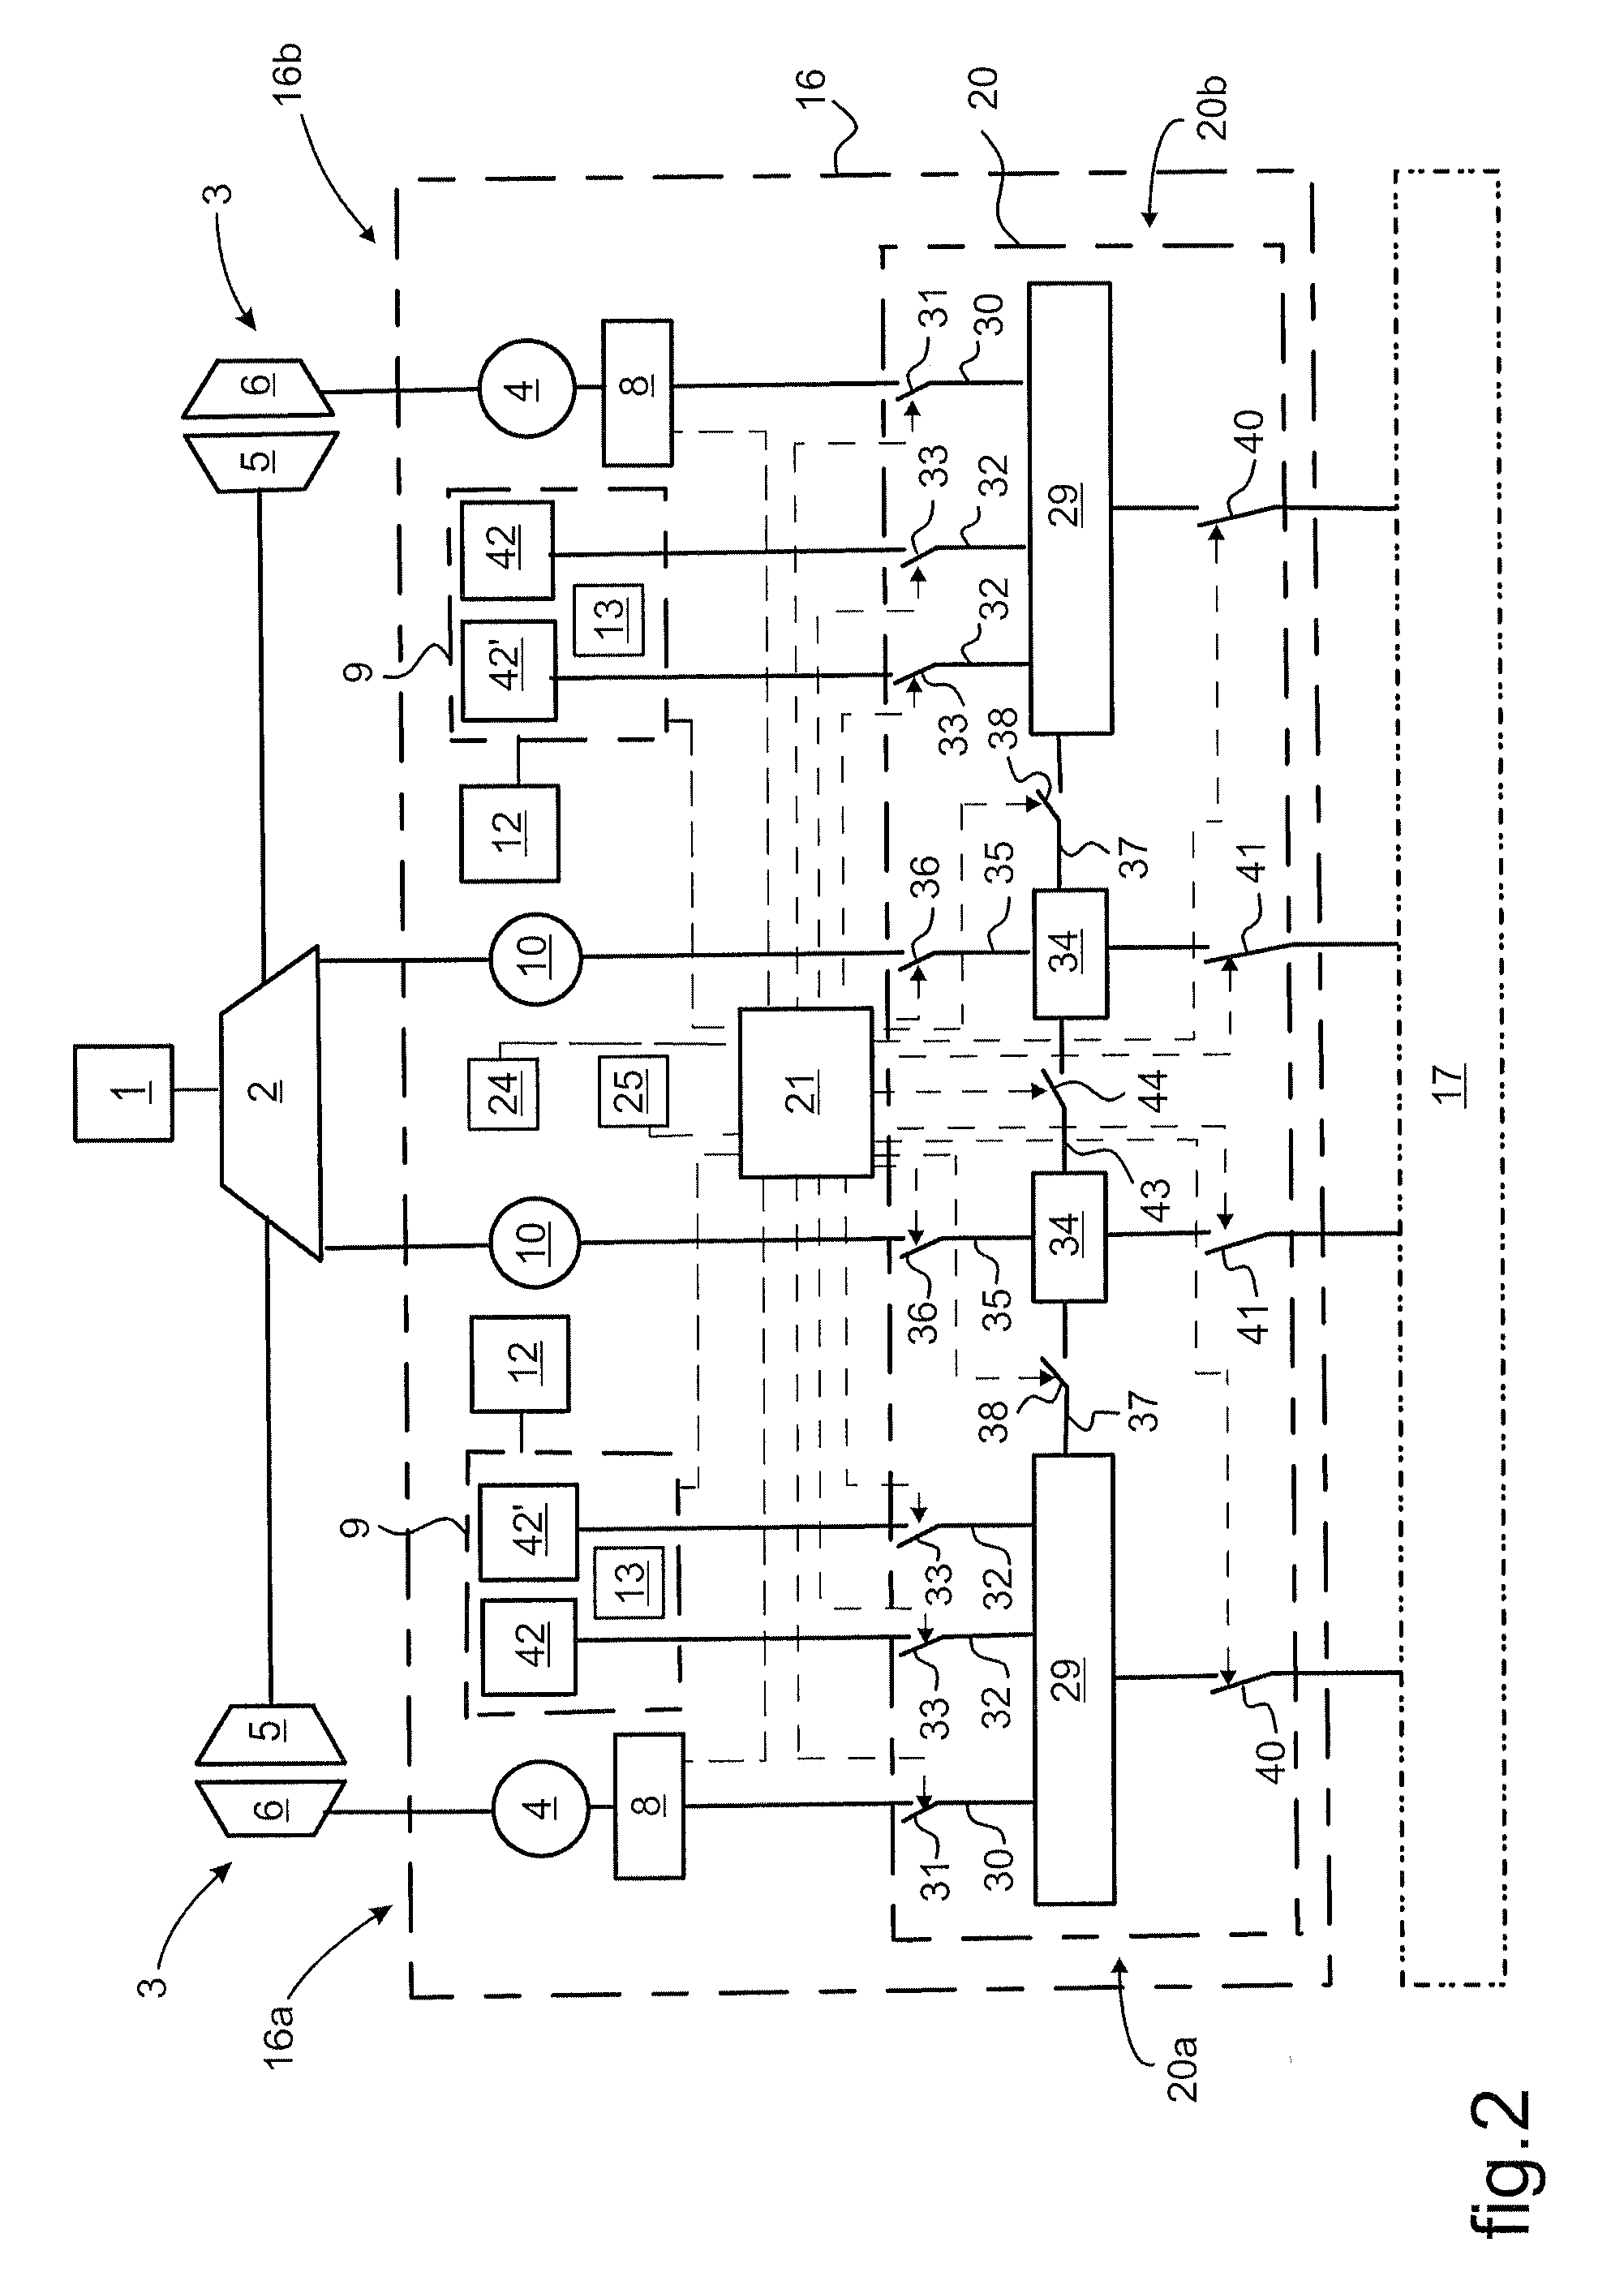 Hybrid power supply architecture for supplying mechanical power to a rotor and managed from the on-board network of a rotorcraft